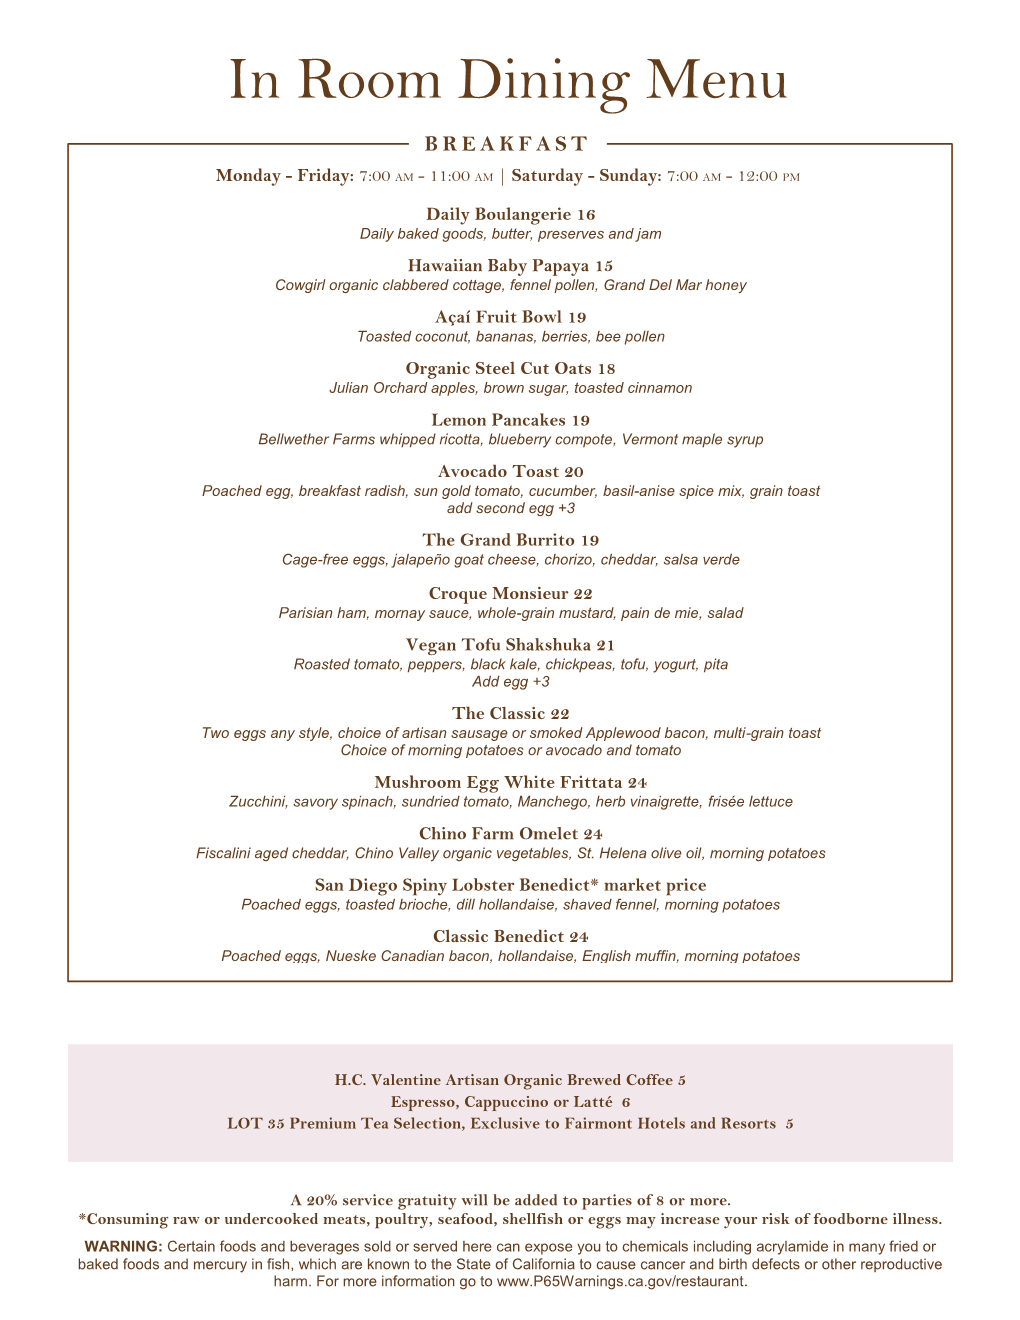 View Our in Room Dining Menu